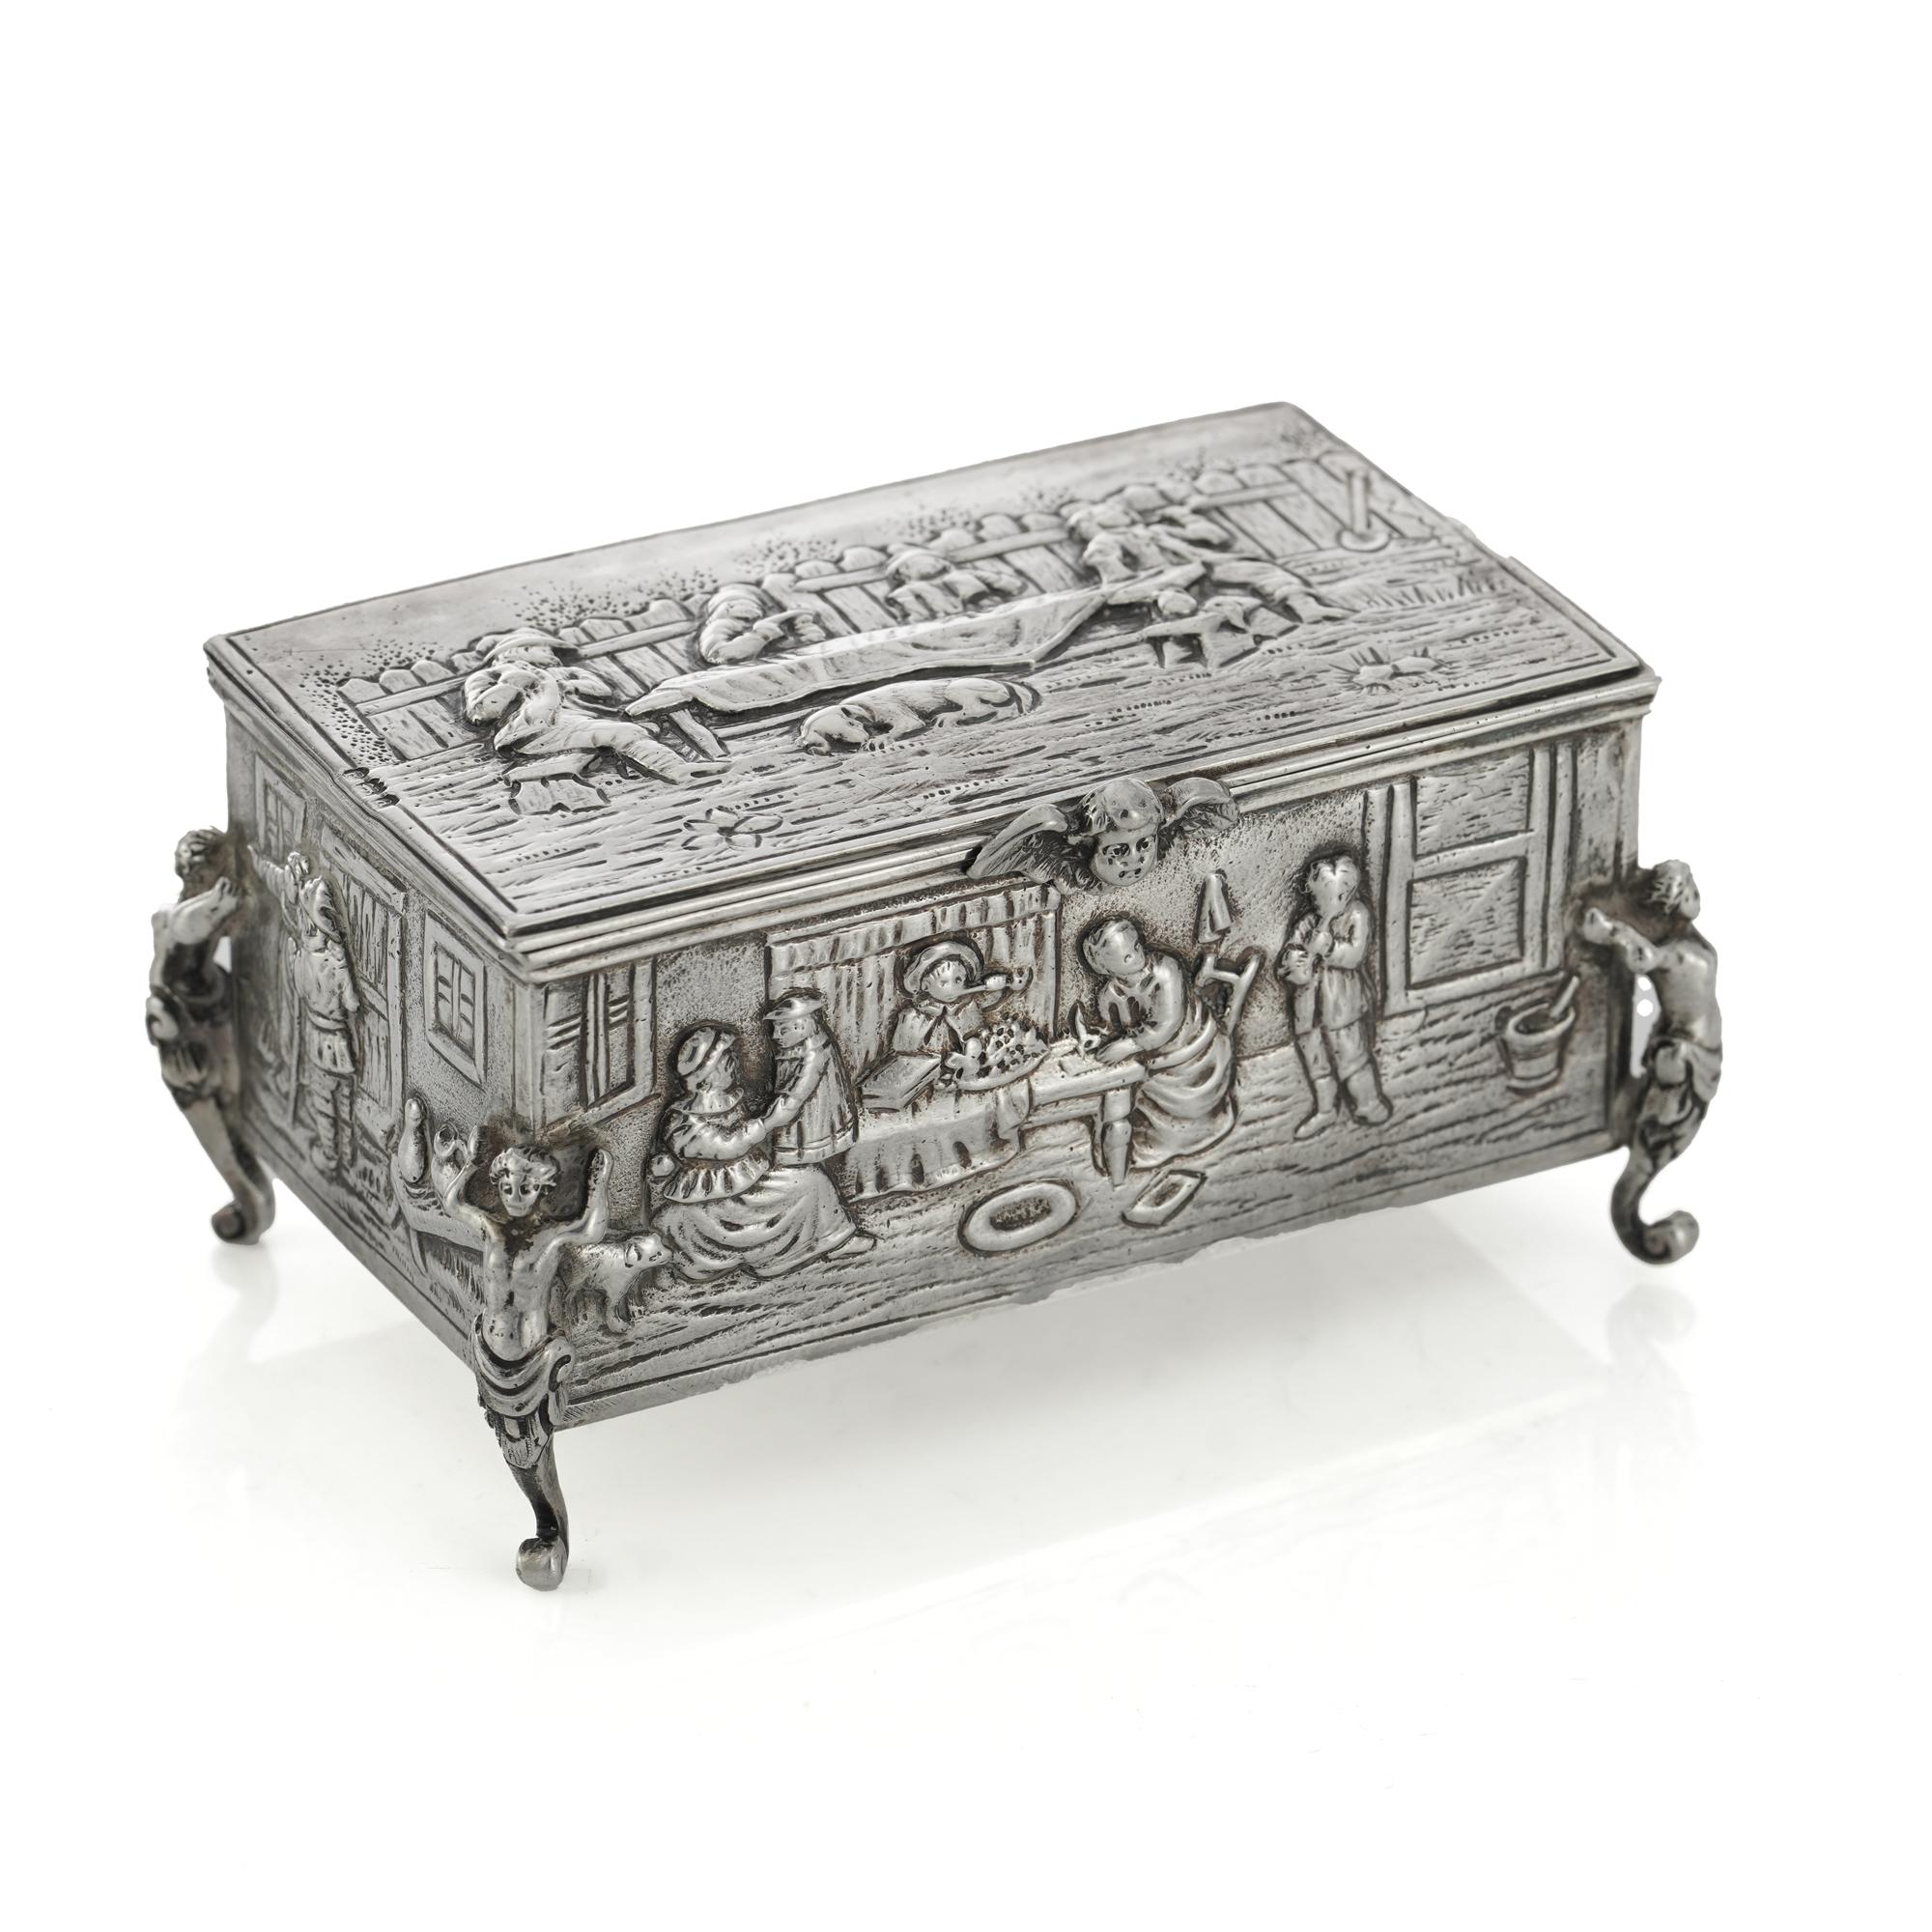 Antique late Victorian Sterling silver jewellery box with daily life scenes and characters.
Hallmarked with London import marks, 1896 and Hanau silver marks.

Approx. Dimensions -
Length x width x height: 9 x 5.3 x 4.6 cm
Weight: 125 grams in